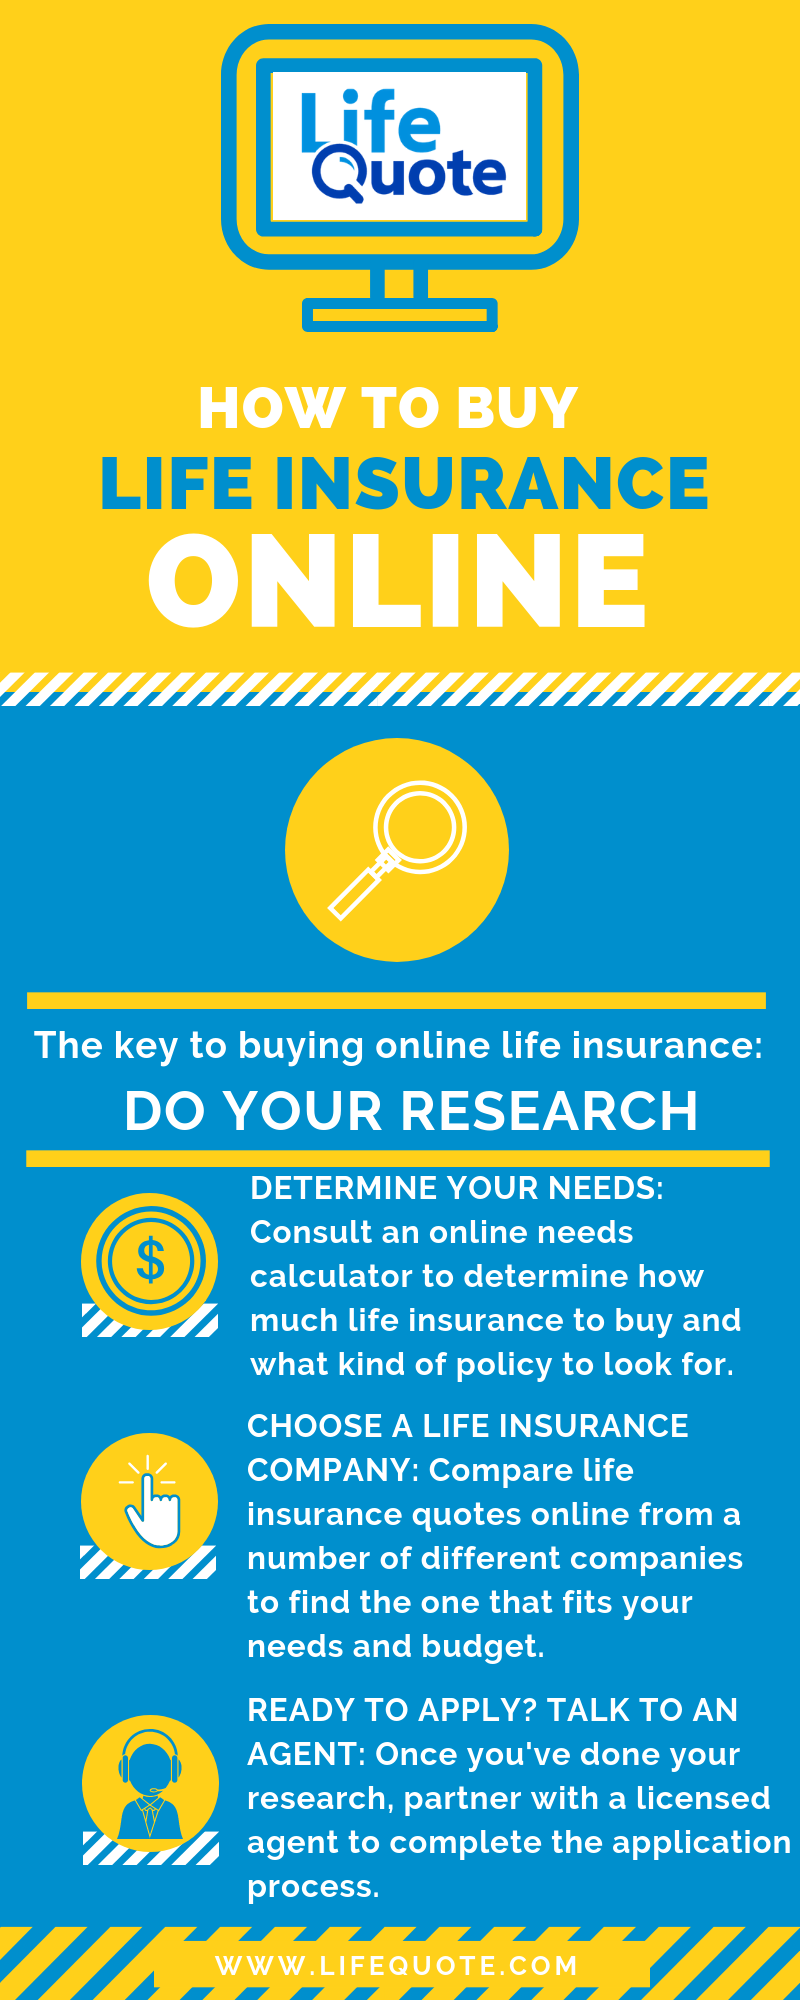 How to Compare Life Insurance Quotes Online